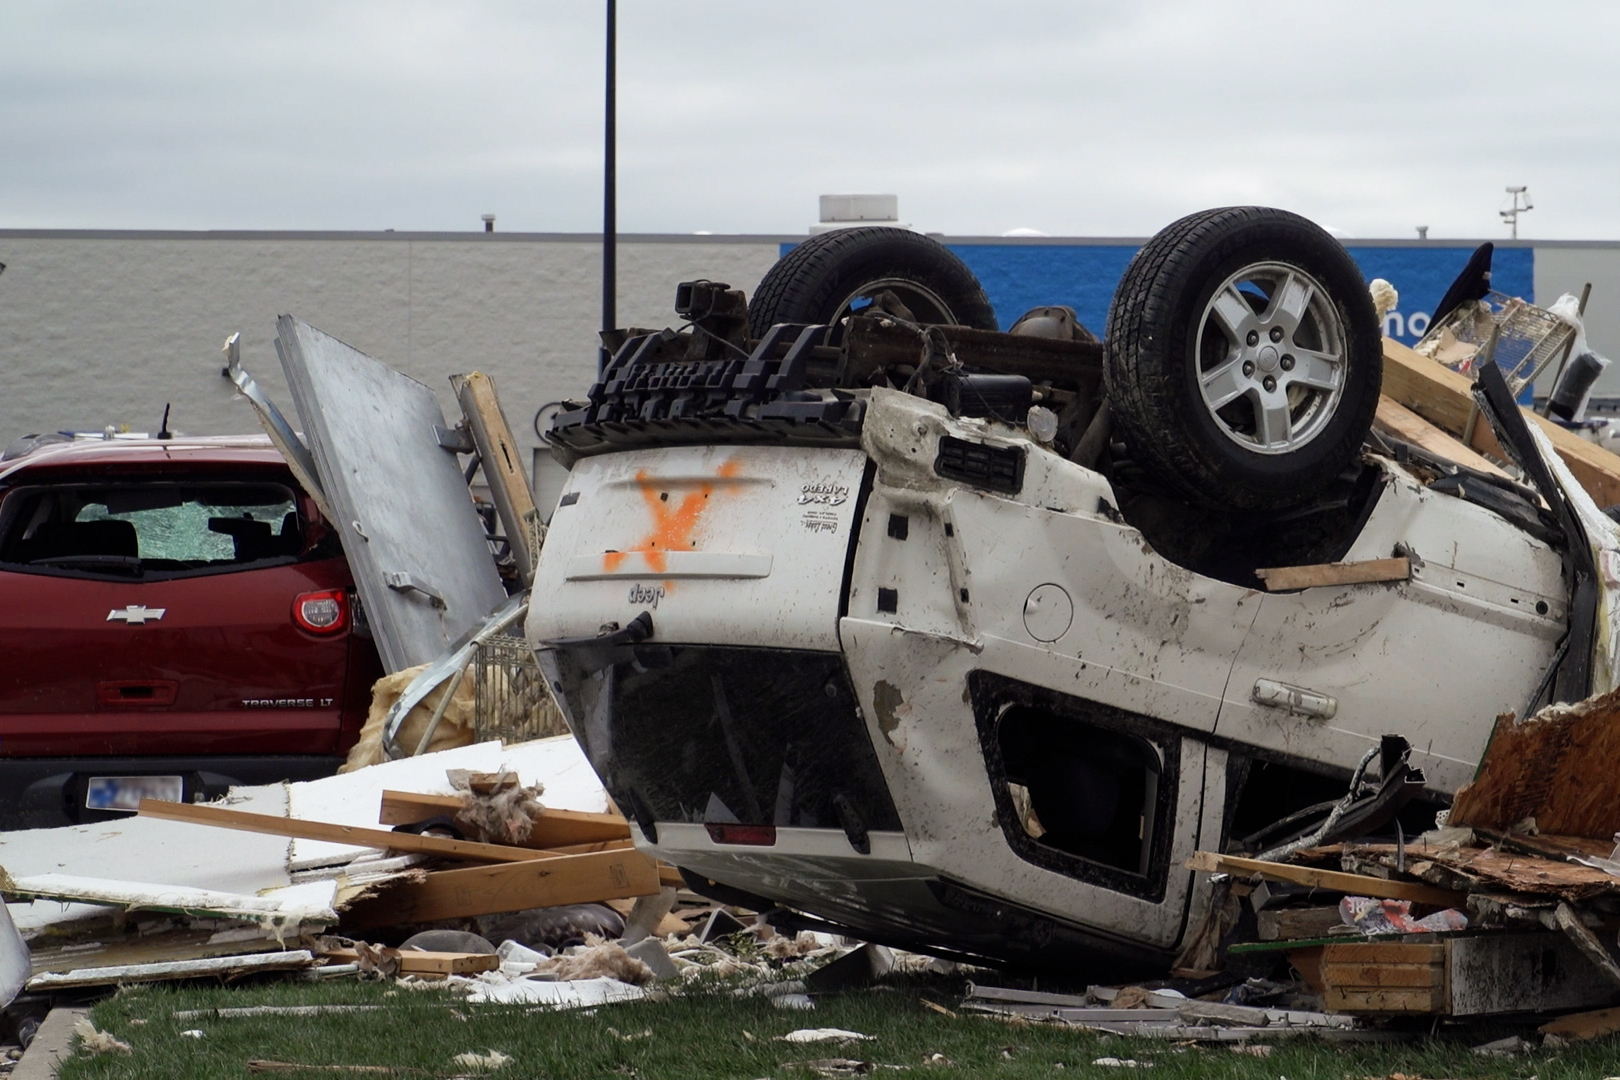 Two damaged vehicles and a pile of debris sits where a Taco Bell once was. The visible license plate has been blurred for privacy.